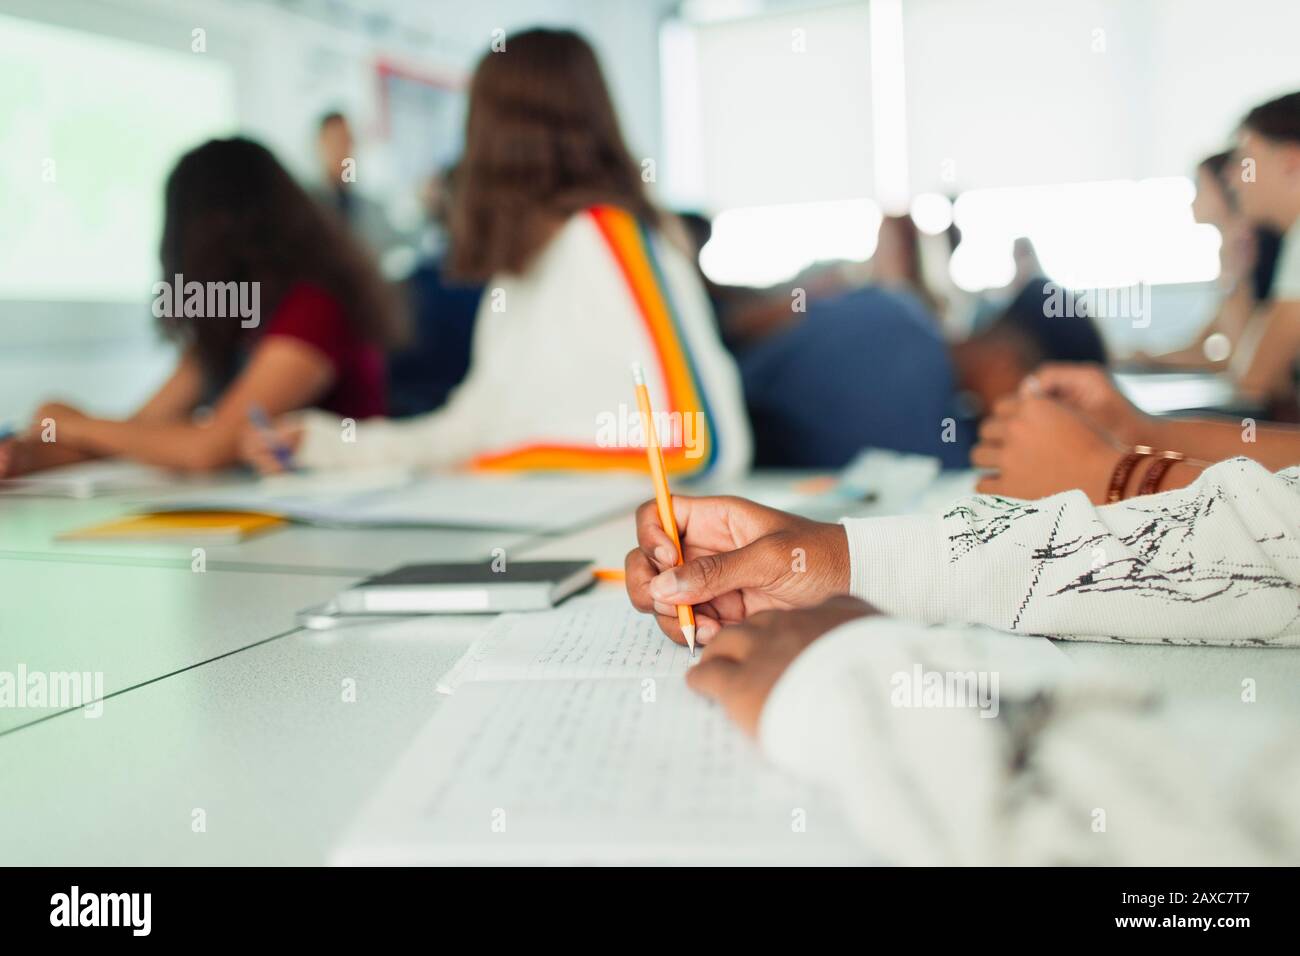 High school student studying, writing in notebook during lesson in classroom Stock Photo